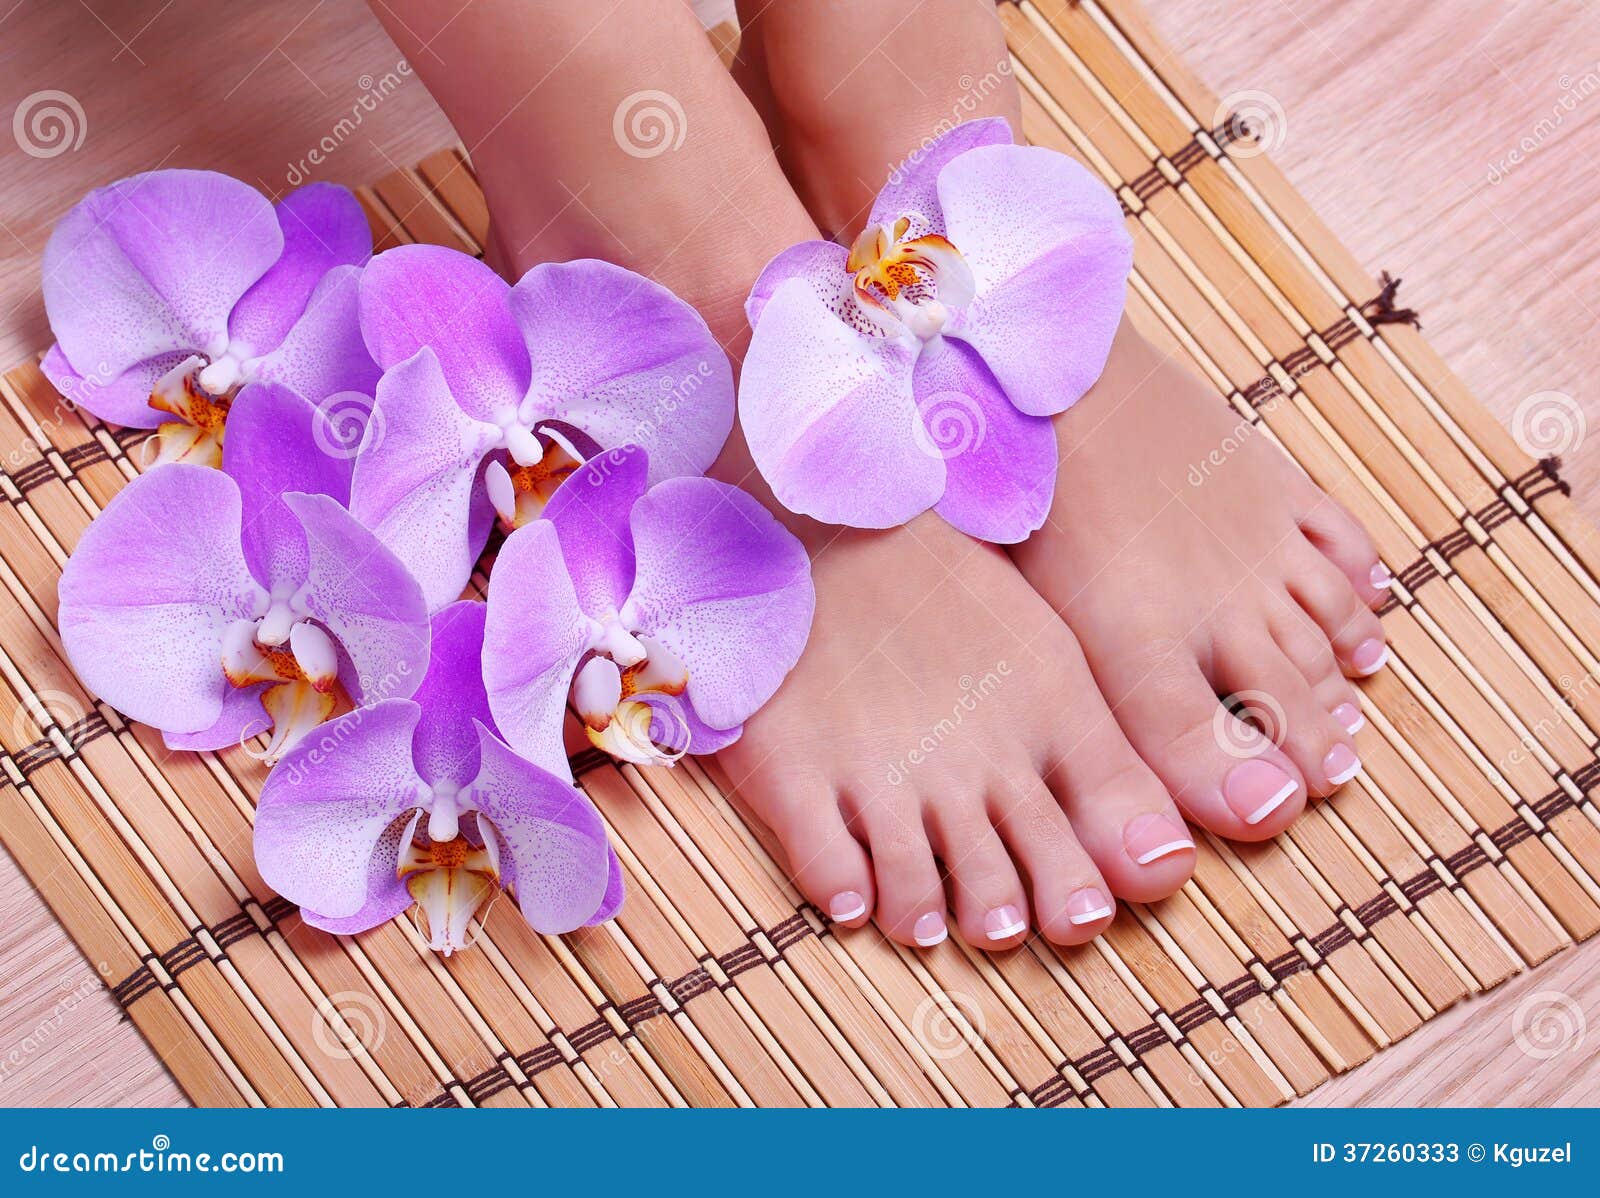 pedicure with pink orchid flowers on bamboo mat